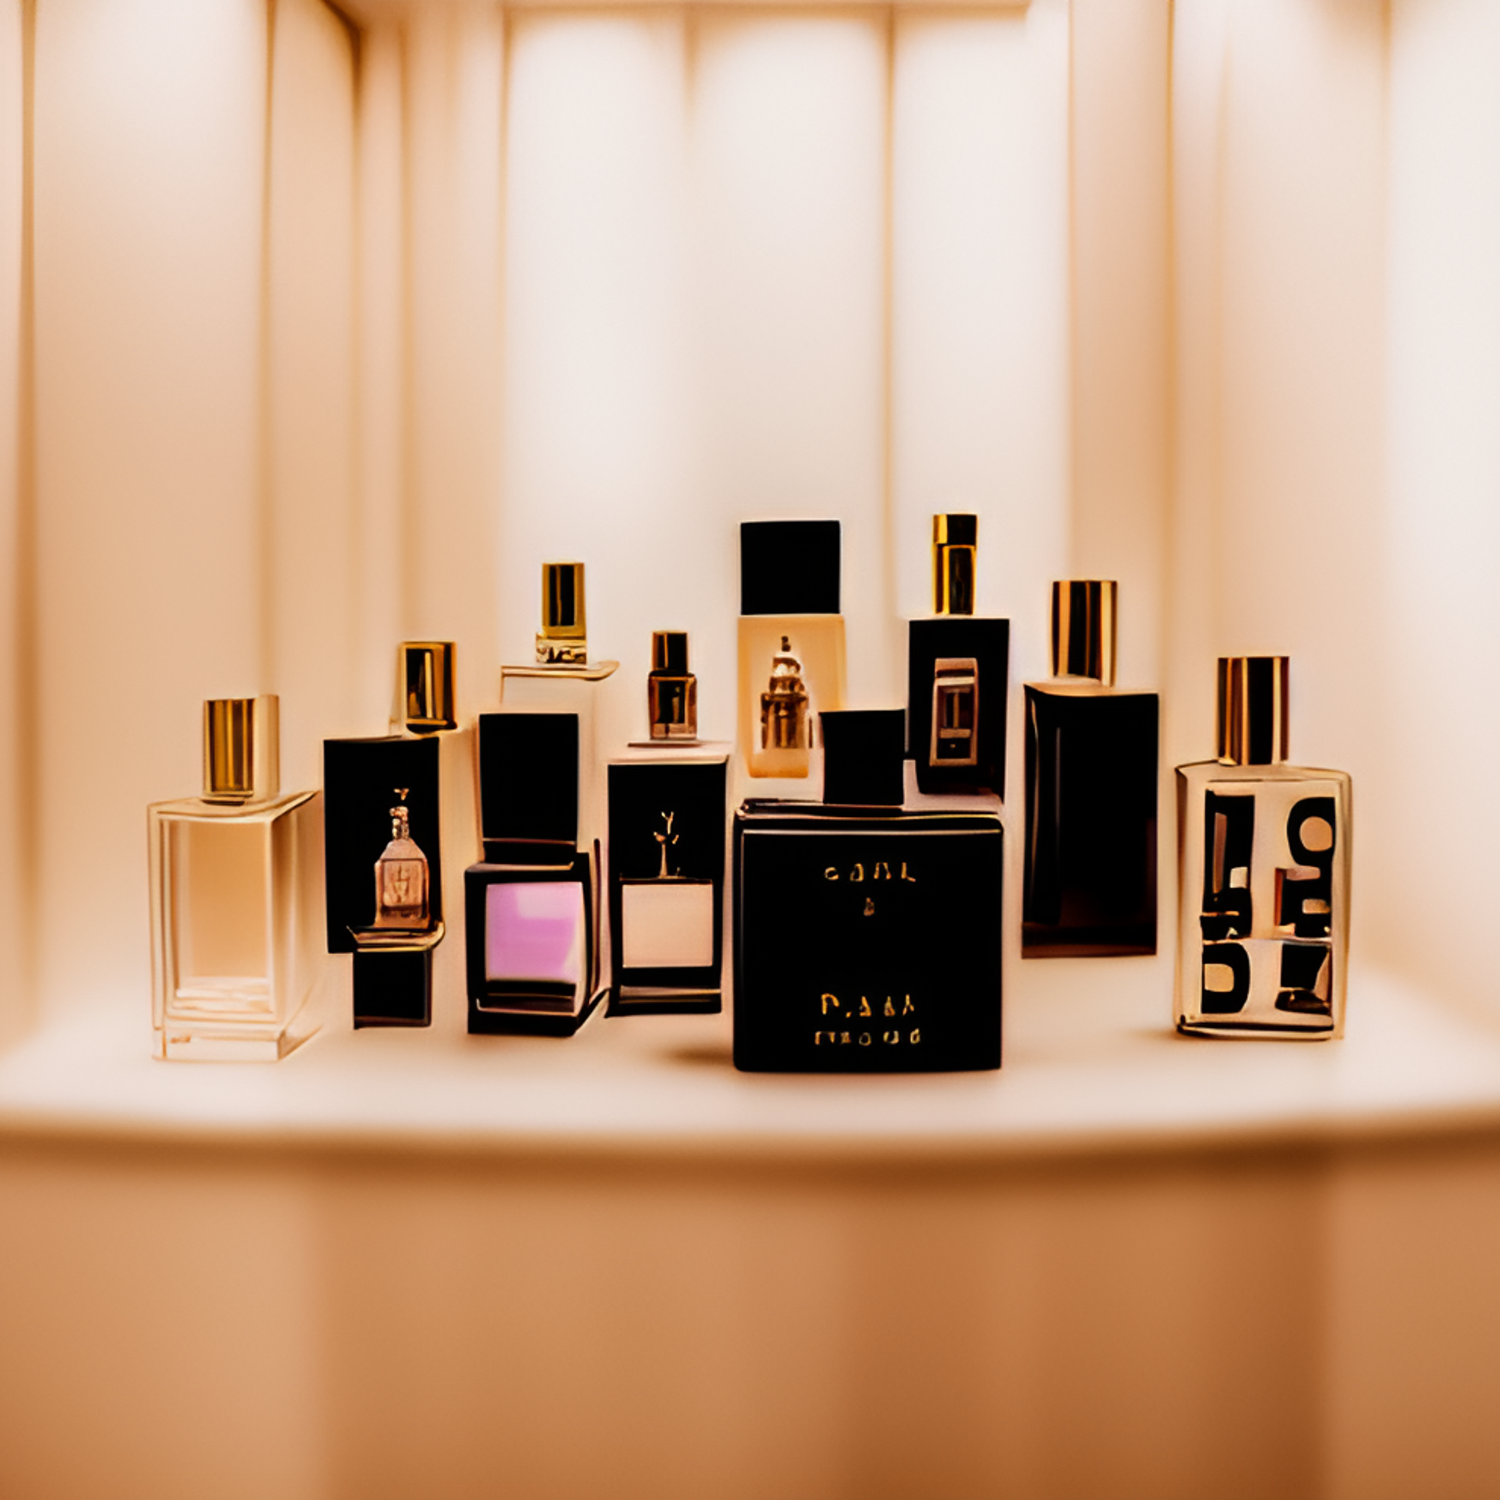 How To… Get The Most From Your Perfume